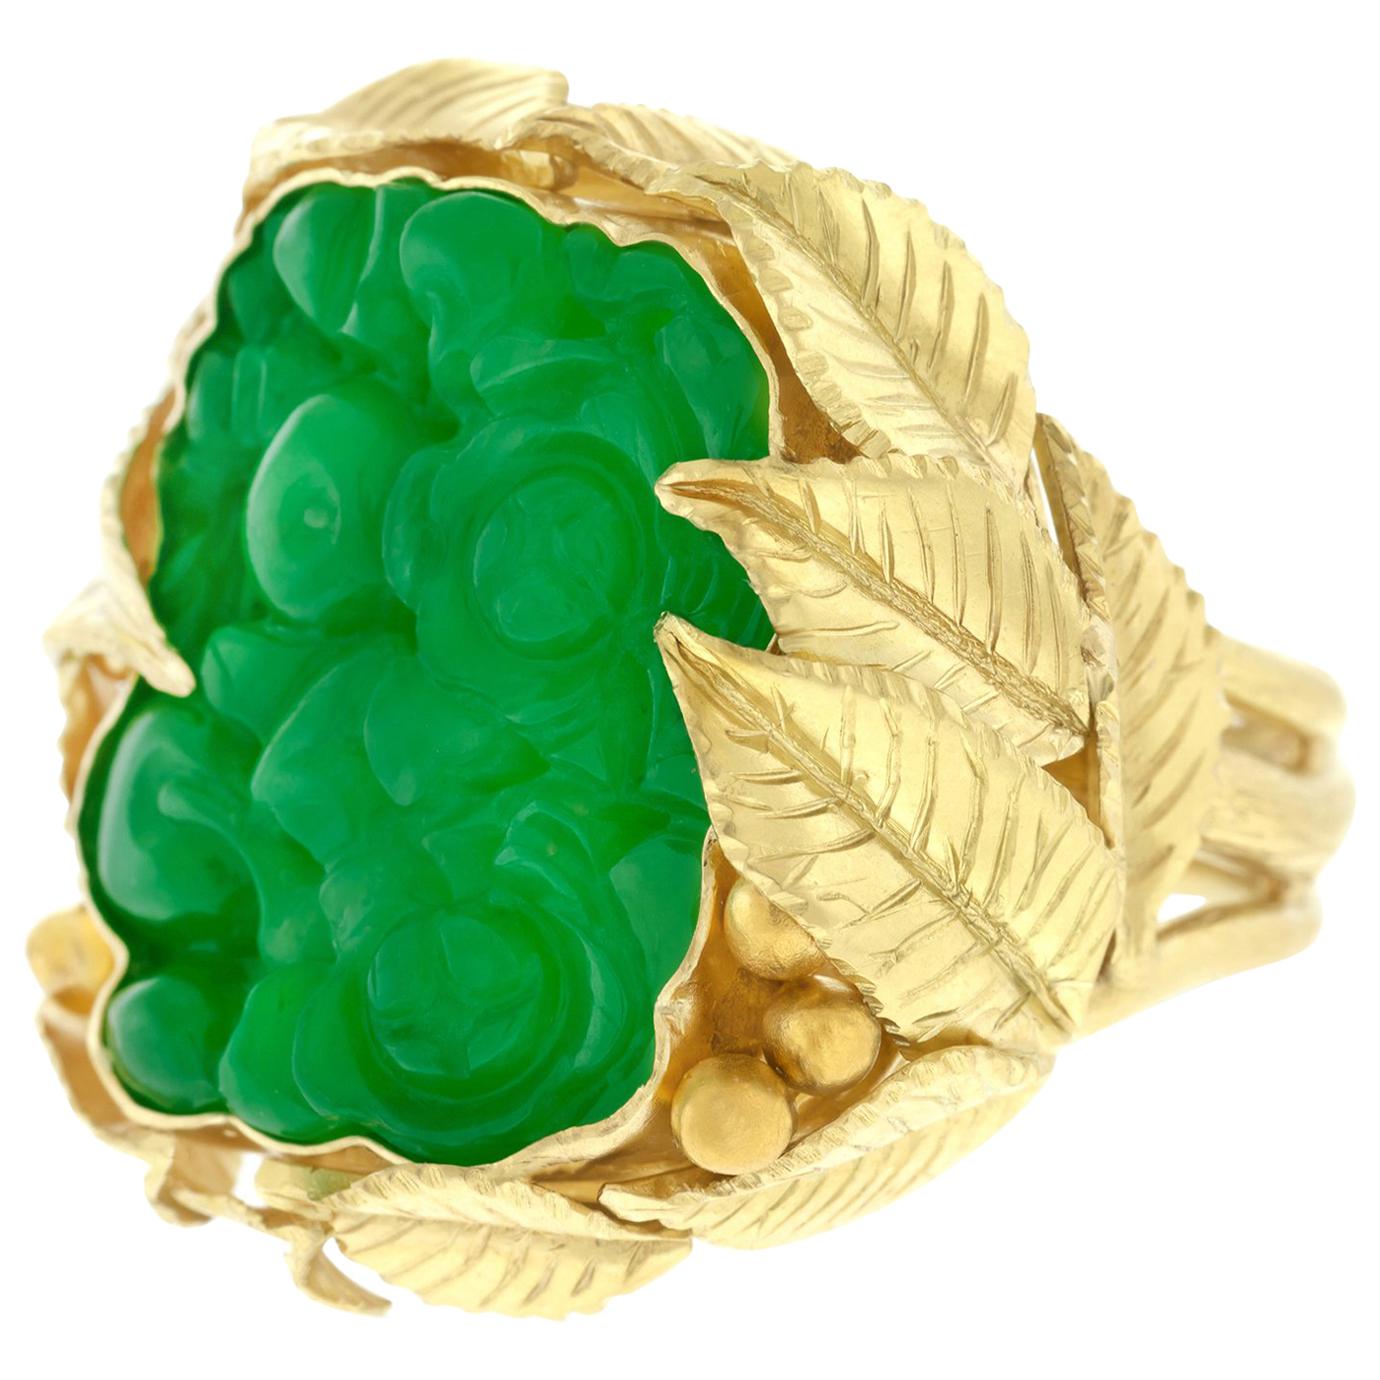 Antique Carved Jade in a One-of-a-Kind Gold Ring AGL Report